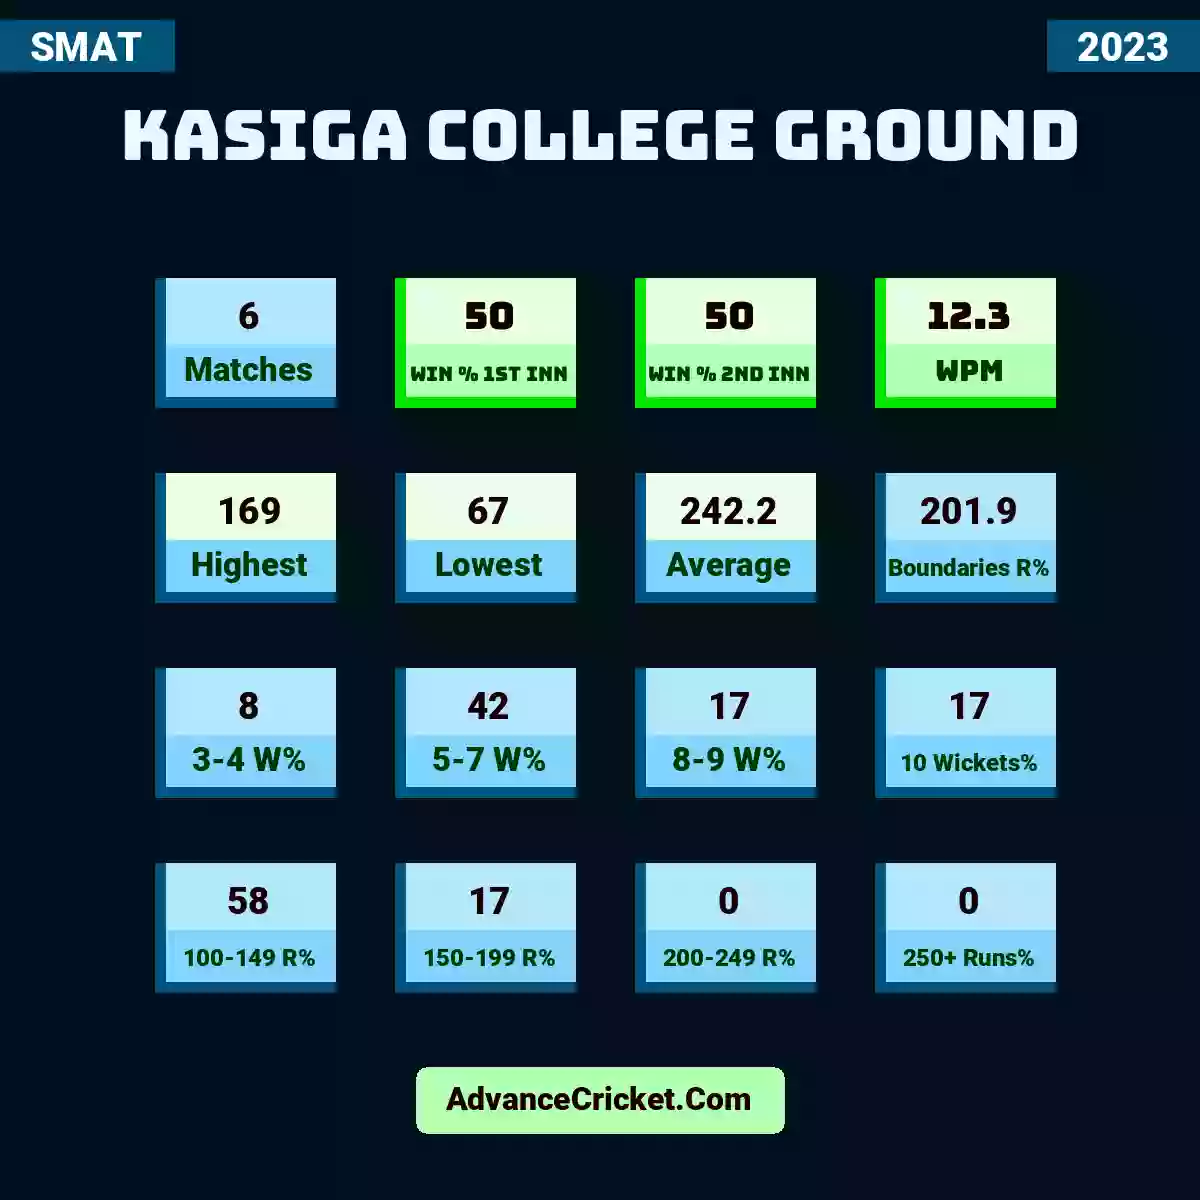 Image showing Kasiga College Ground with Matches: 6, Win % 1st Inn: 50, Win % 2nd Inn: 50, WPM: 12.3, Highest: 169, Lowest: 67, Average: 242.2, Boundaries R%: 201.9, 3-4 W%: 8, 5-7 W%: 42, 8-9 W%: 17, 10 Wickets%: 17, 100-149 R%: 58, 150-199 R%: 17, 200-249 R%: 0, 250+ Runs%: 0.